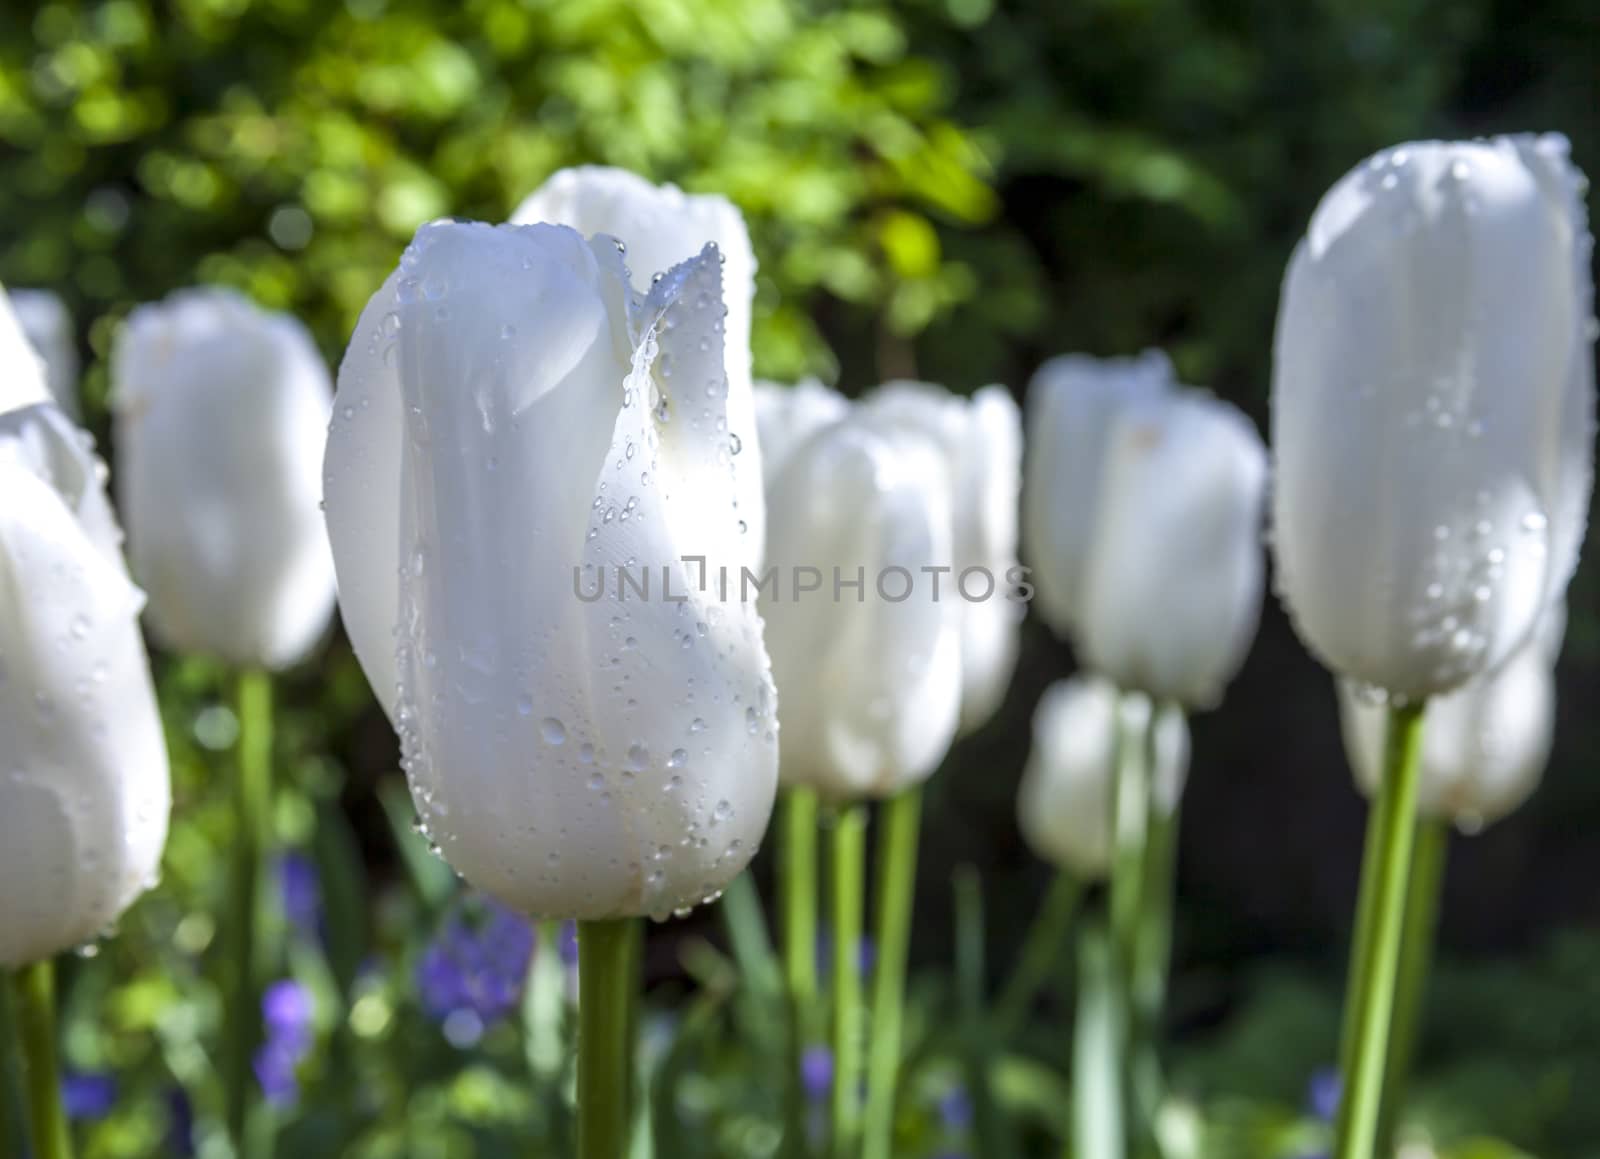 This is an image of a garden of blooming white tulips found in a formal garden just after being watered. 